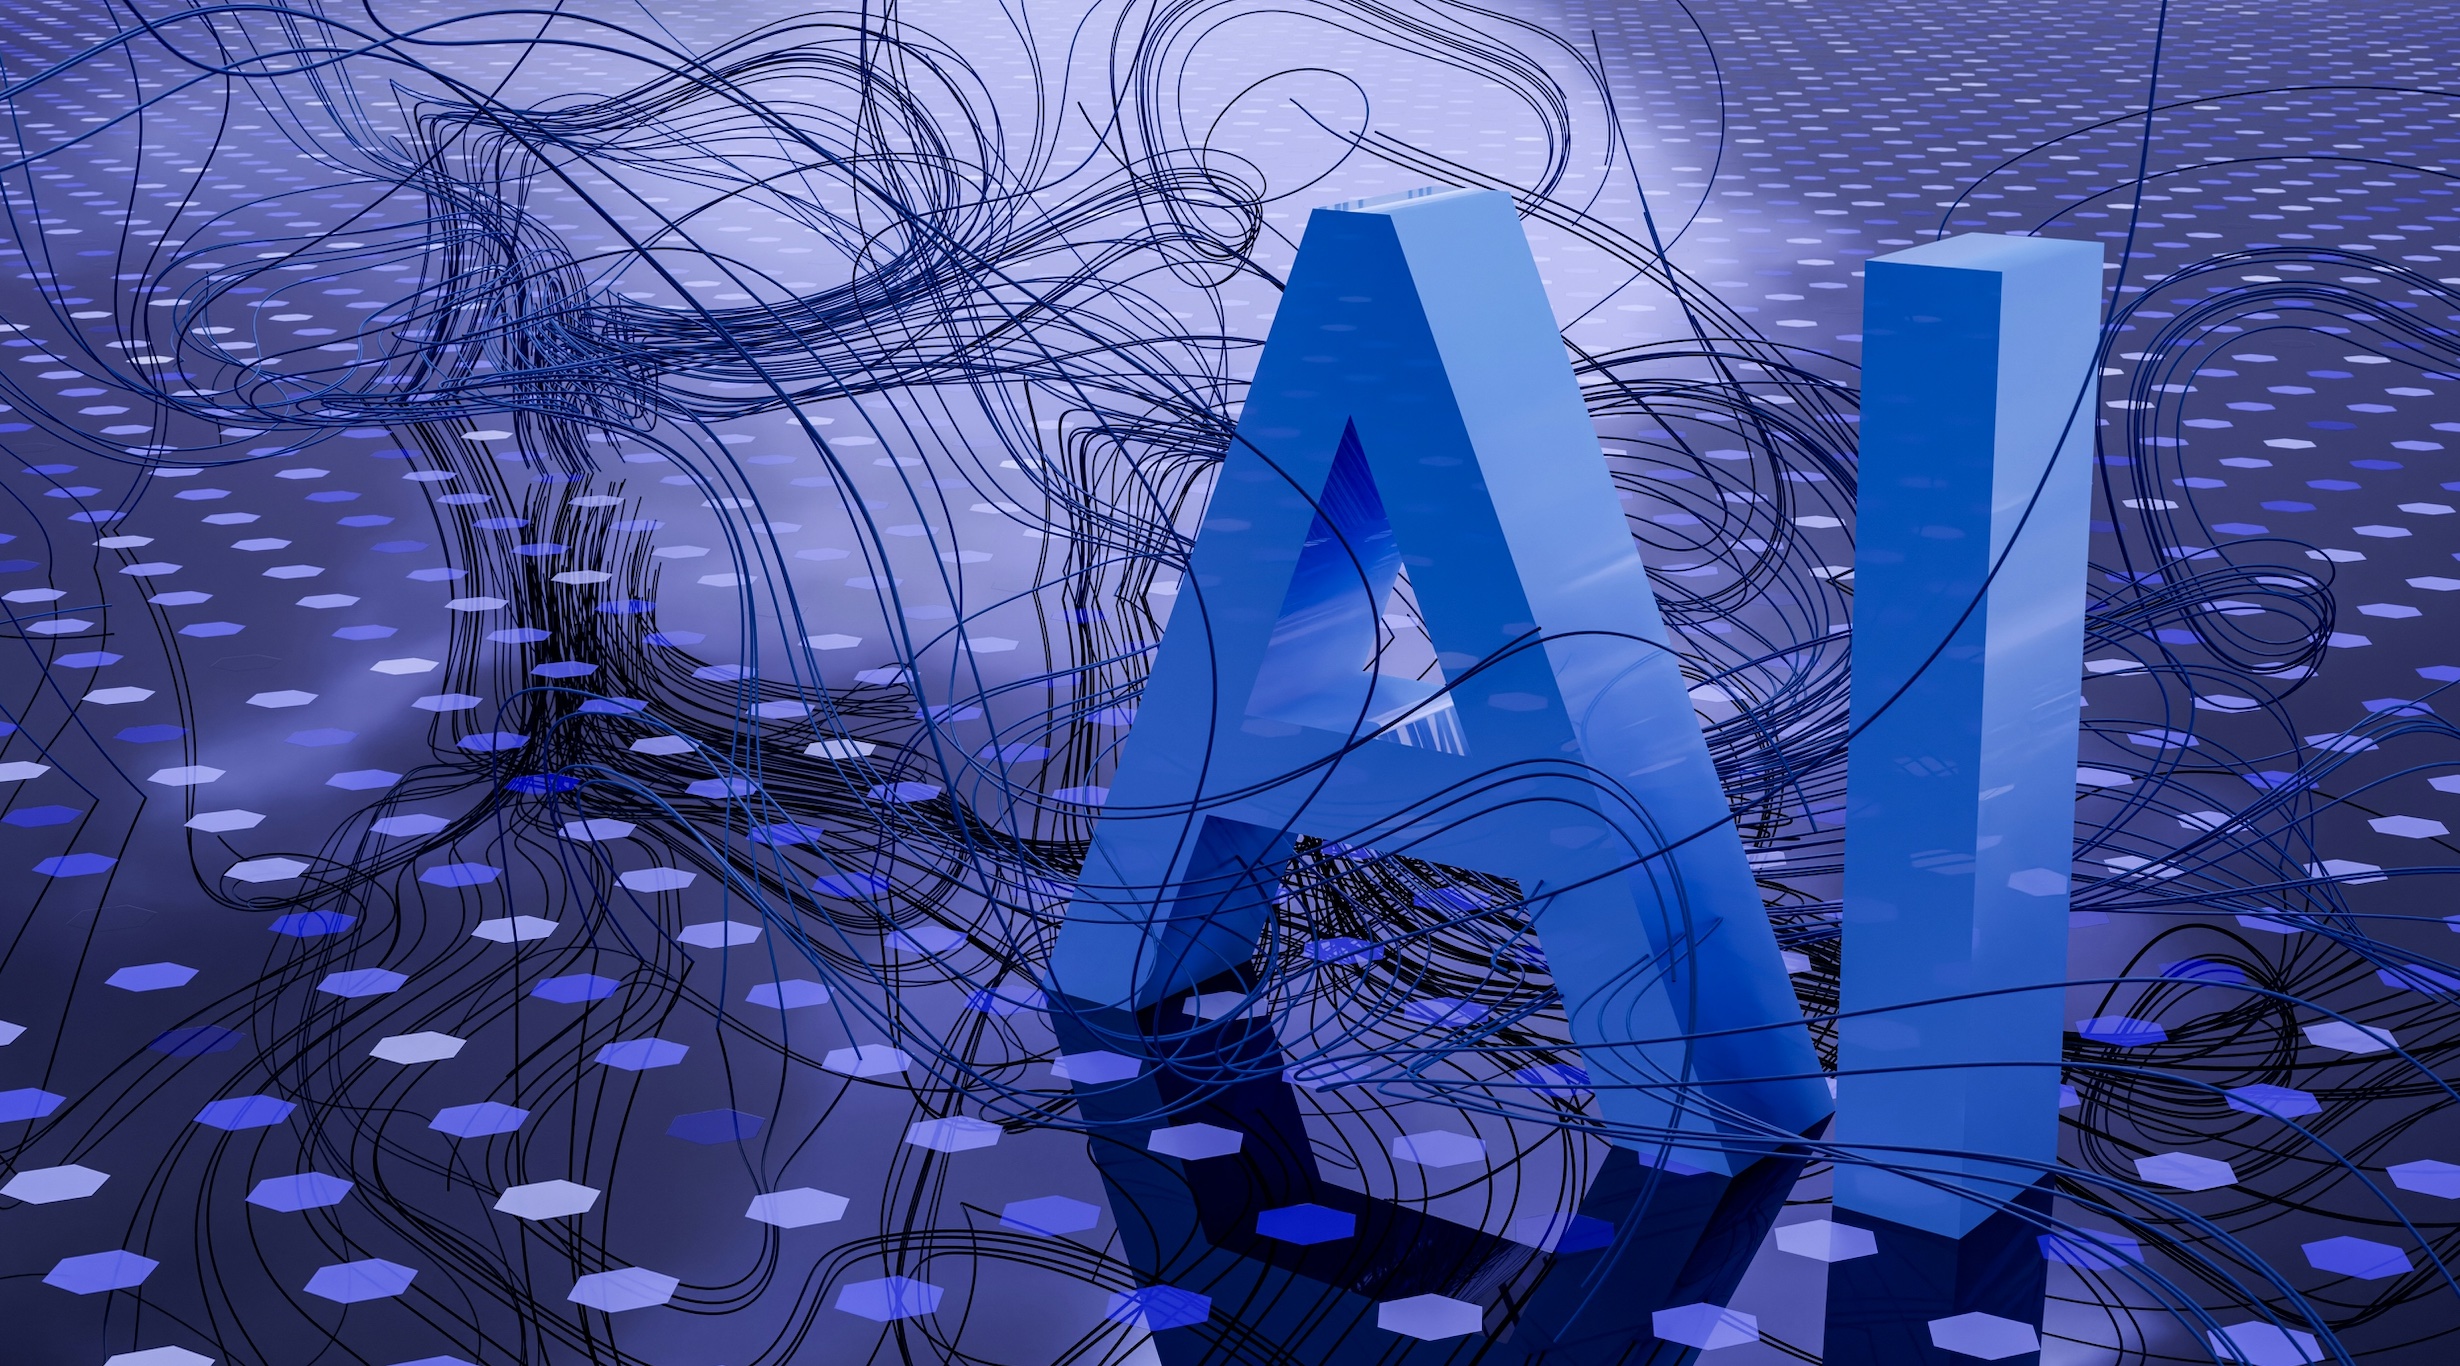 AI in blue letters on background of shades of blue with wire-like lines around letters; image by Steve Johnson, via Unsplash.com.